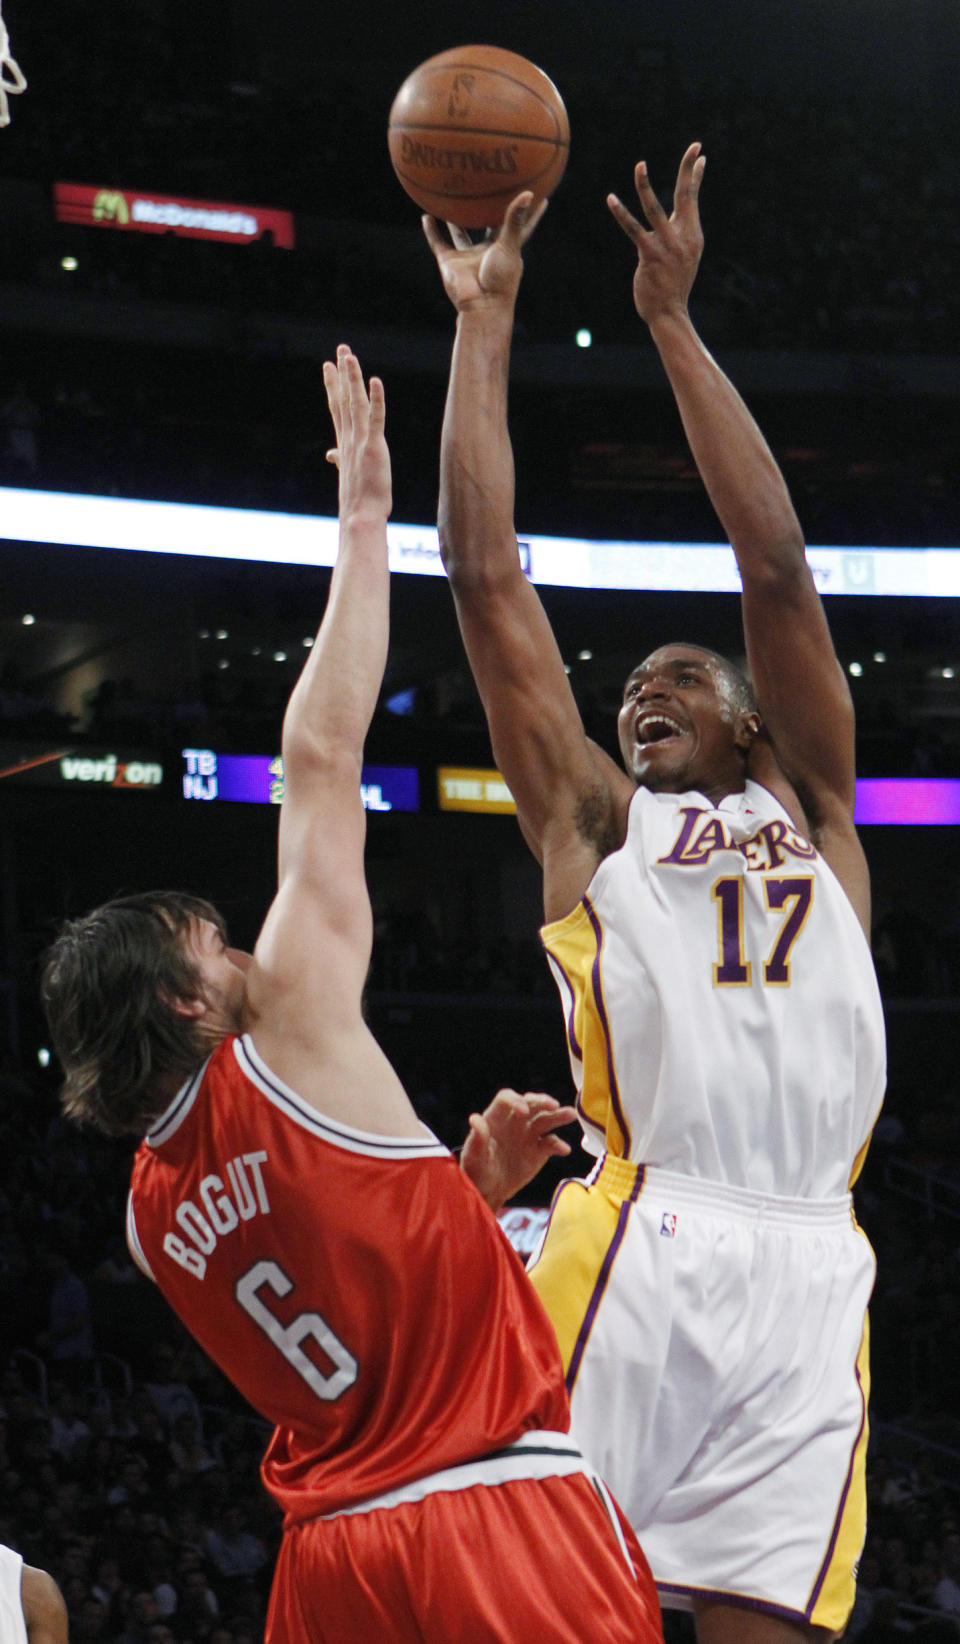 FILE - In this Jan. 10, 2010 file photo, Los Angeles Lakers center Andrew Bynum (17) shoots over Milwaukee Bucks center Andrew Bogut (6) during the first half of an NBA basketball game in Los Angeles. . On Saturday, Feb. 1, 2014, the Pacers added size and scoring punch to their roster by signing mercurial free agent center Andrew Bynum for the rest of the season. Team officials did not release additional details about the contract and said Bynum was expected to join the team sometime next week. (AP Photo/Lori Shepler, File)